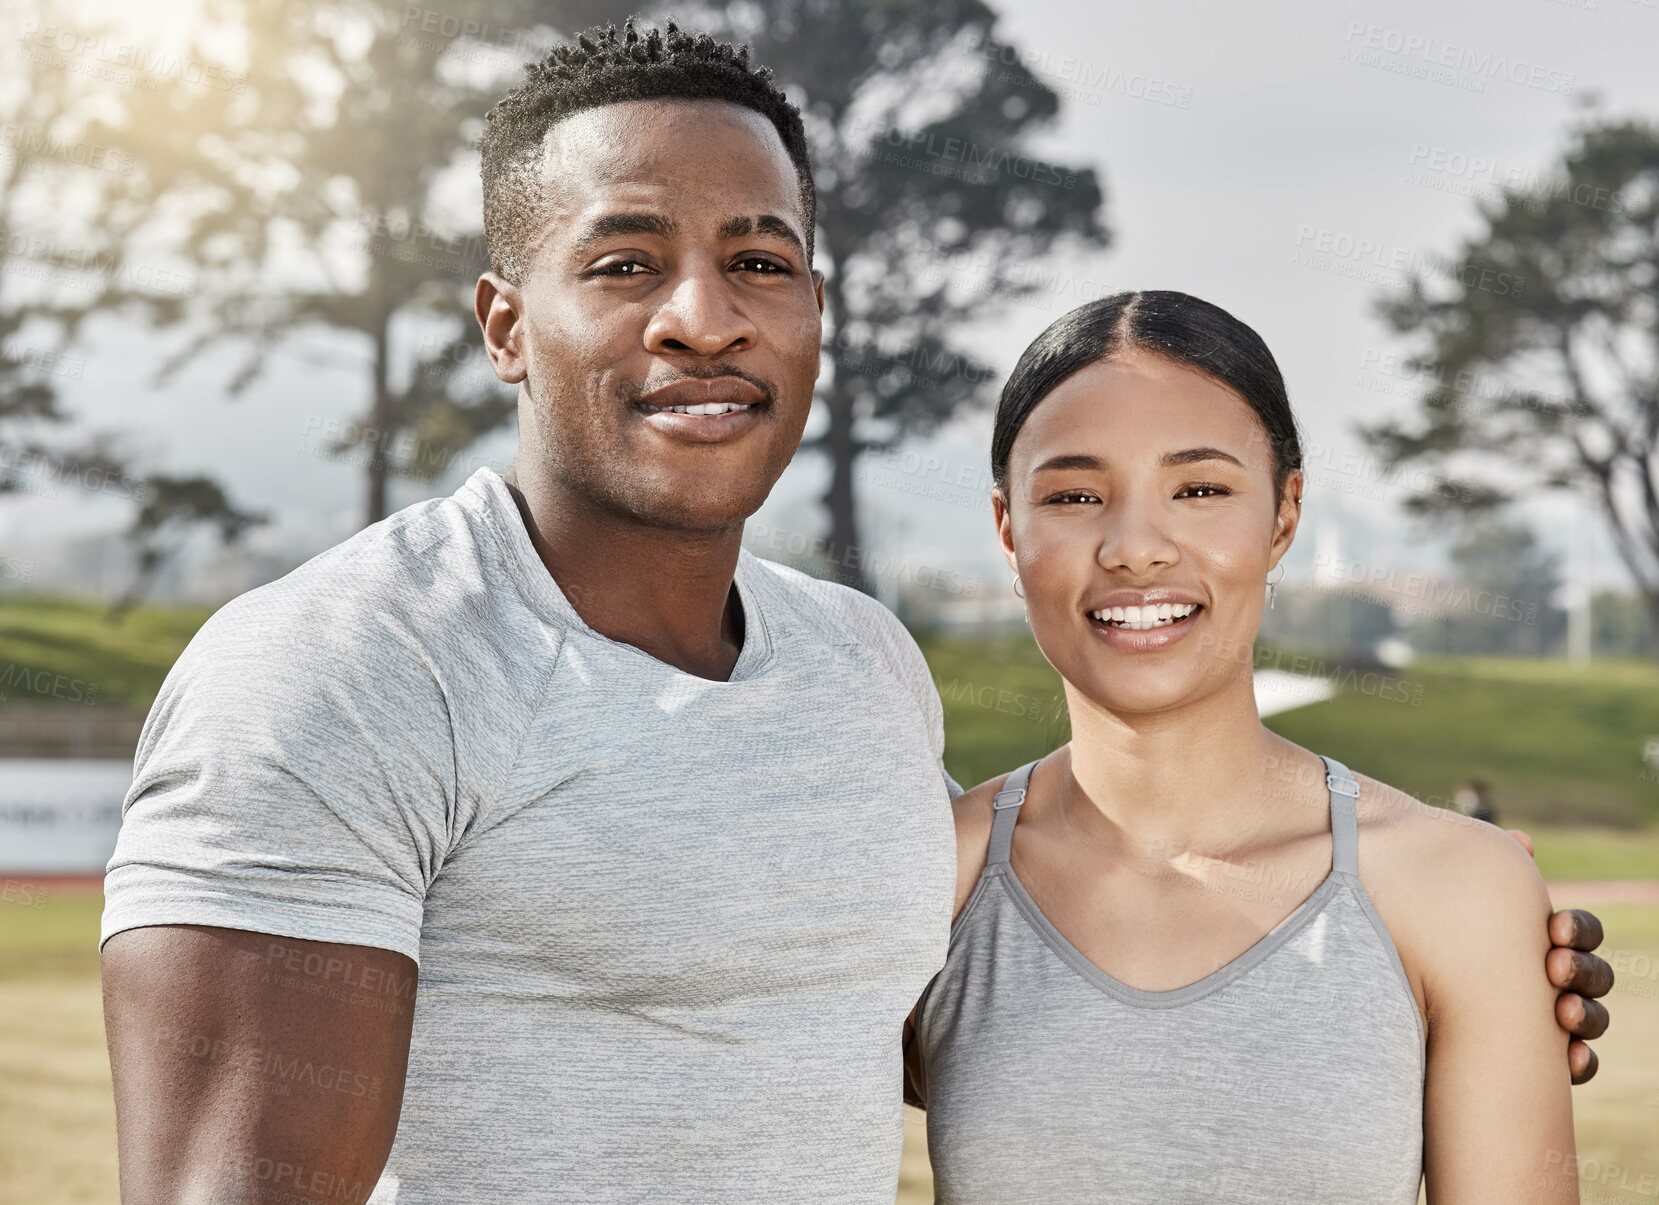 Buy stock photo Shot of an athletic man and woman standing together outside